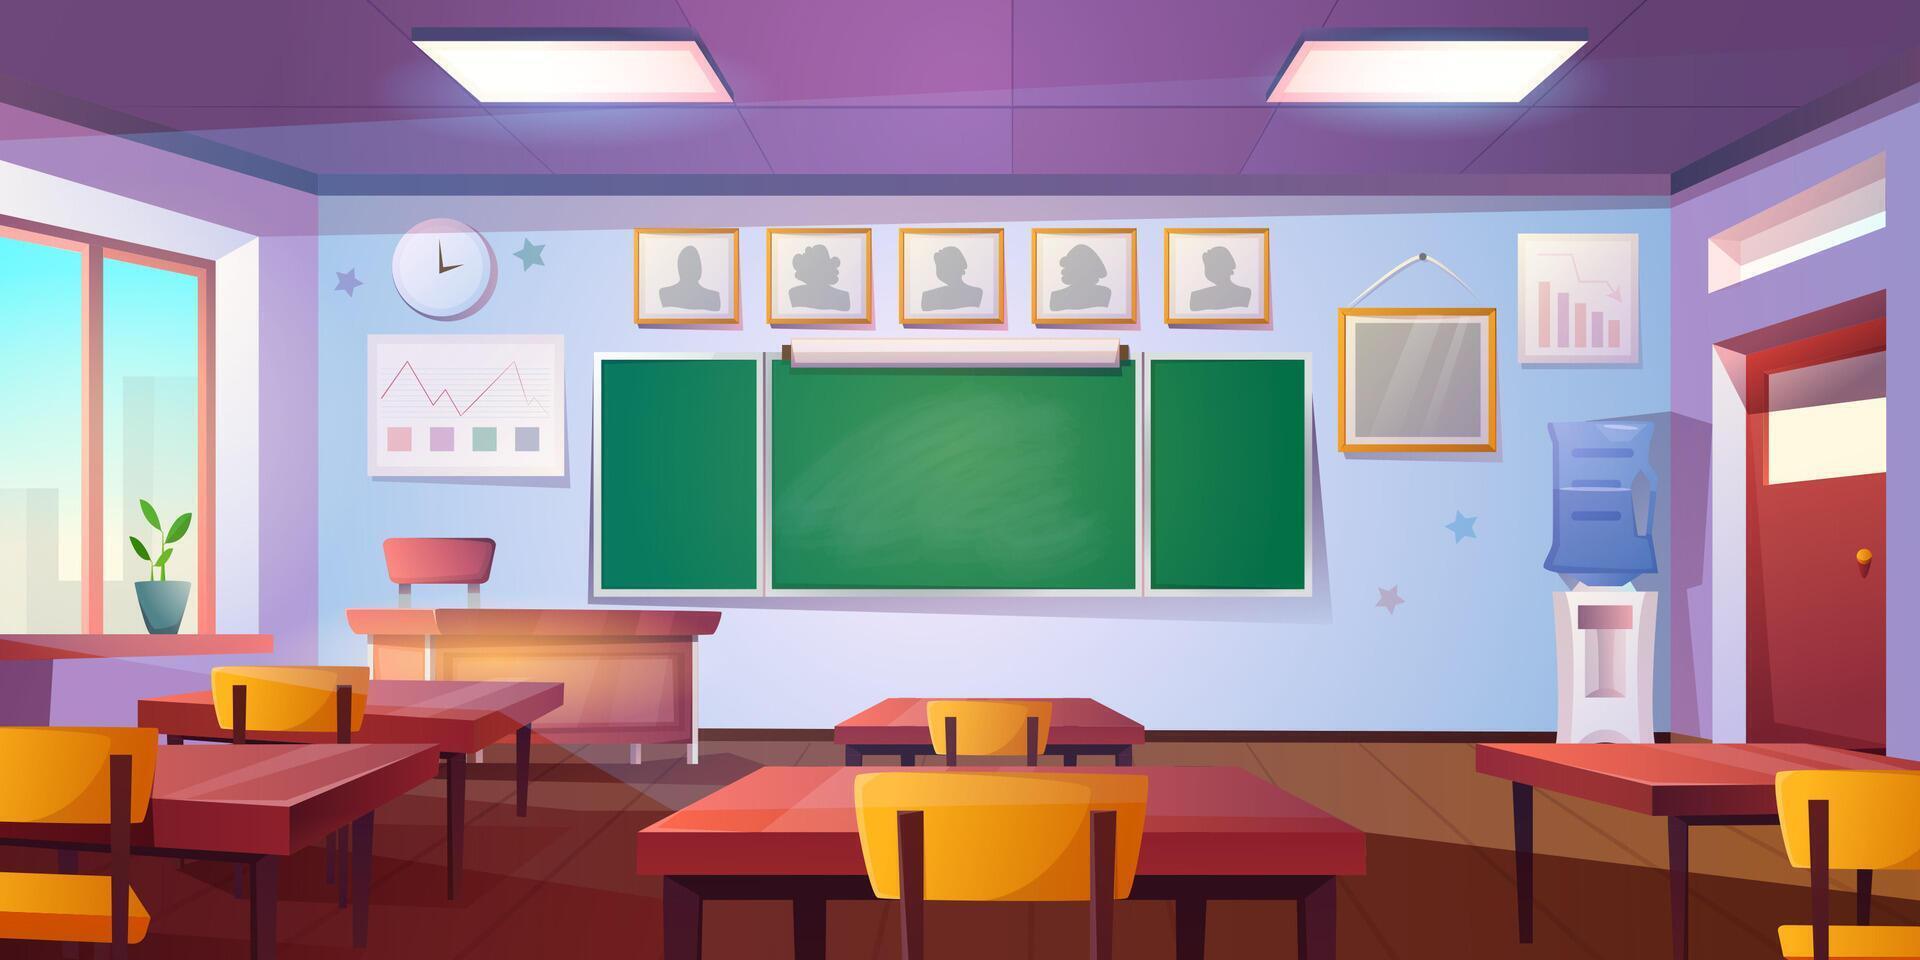 Cartoon empty classroom. Education school or college class interior with green blackboard, teacher and pupil tables, wooden chairs. Room for studying with clock hanging on wall, posters, water cooler. vector